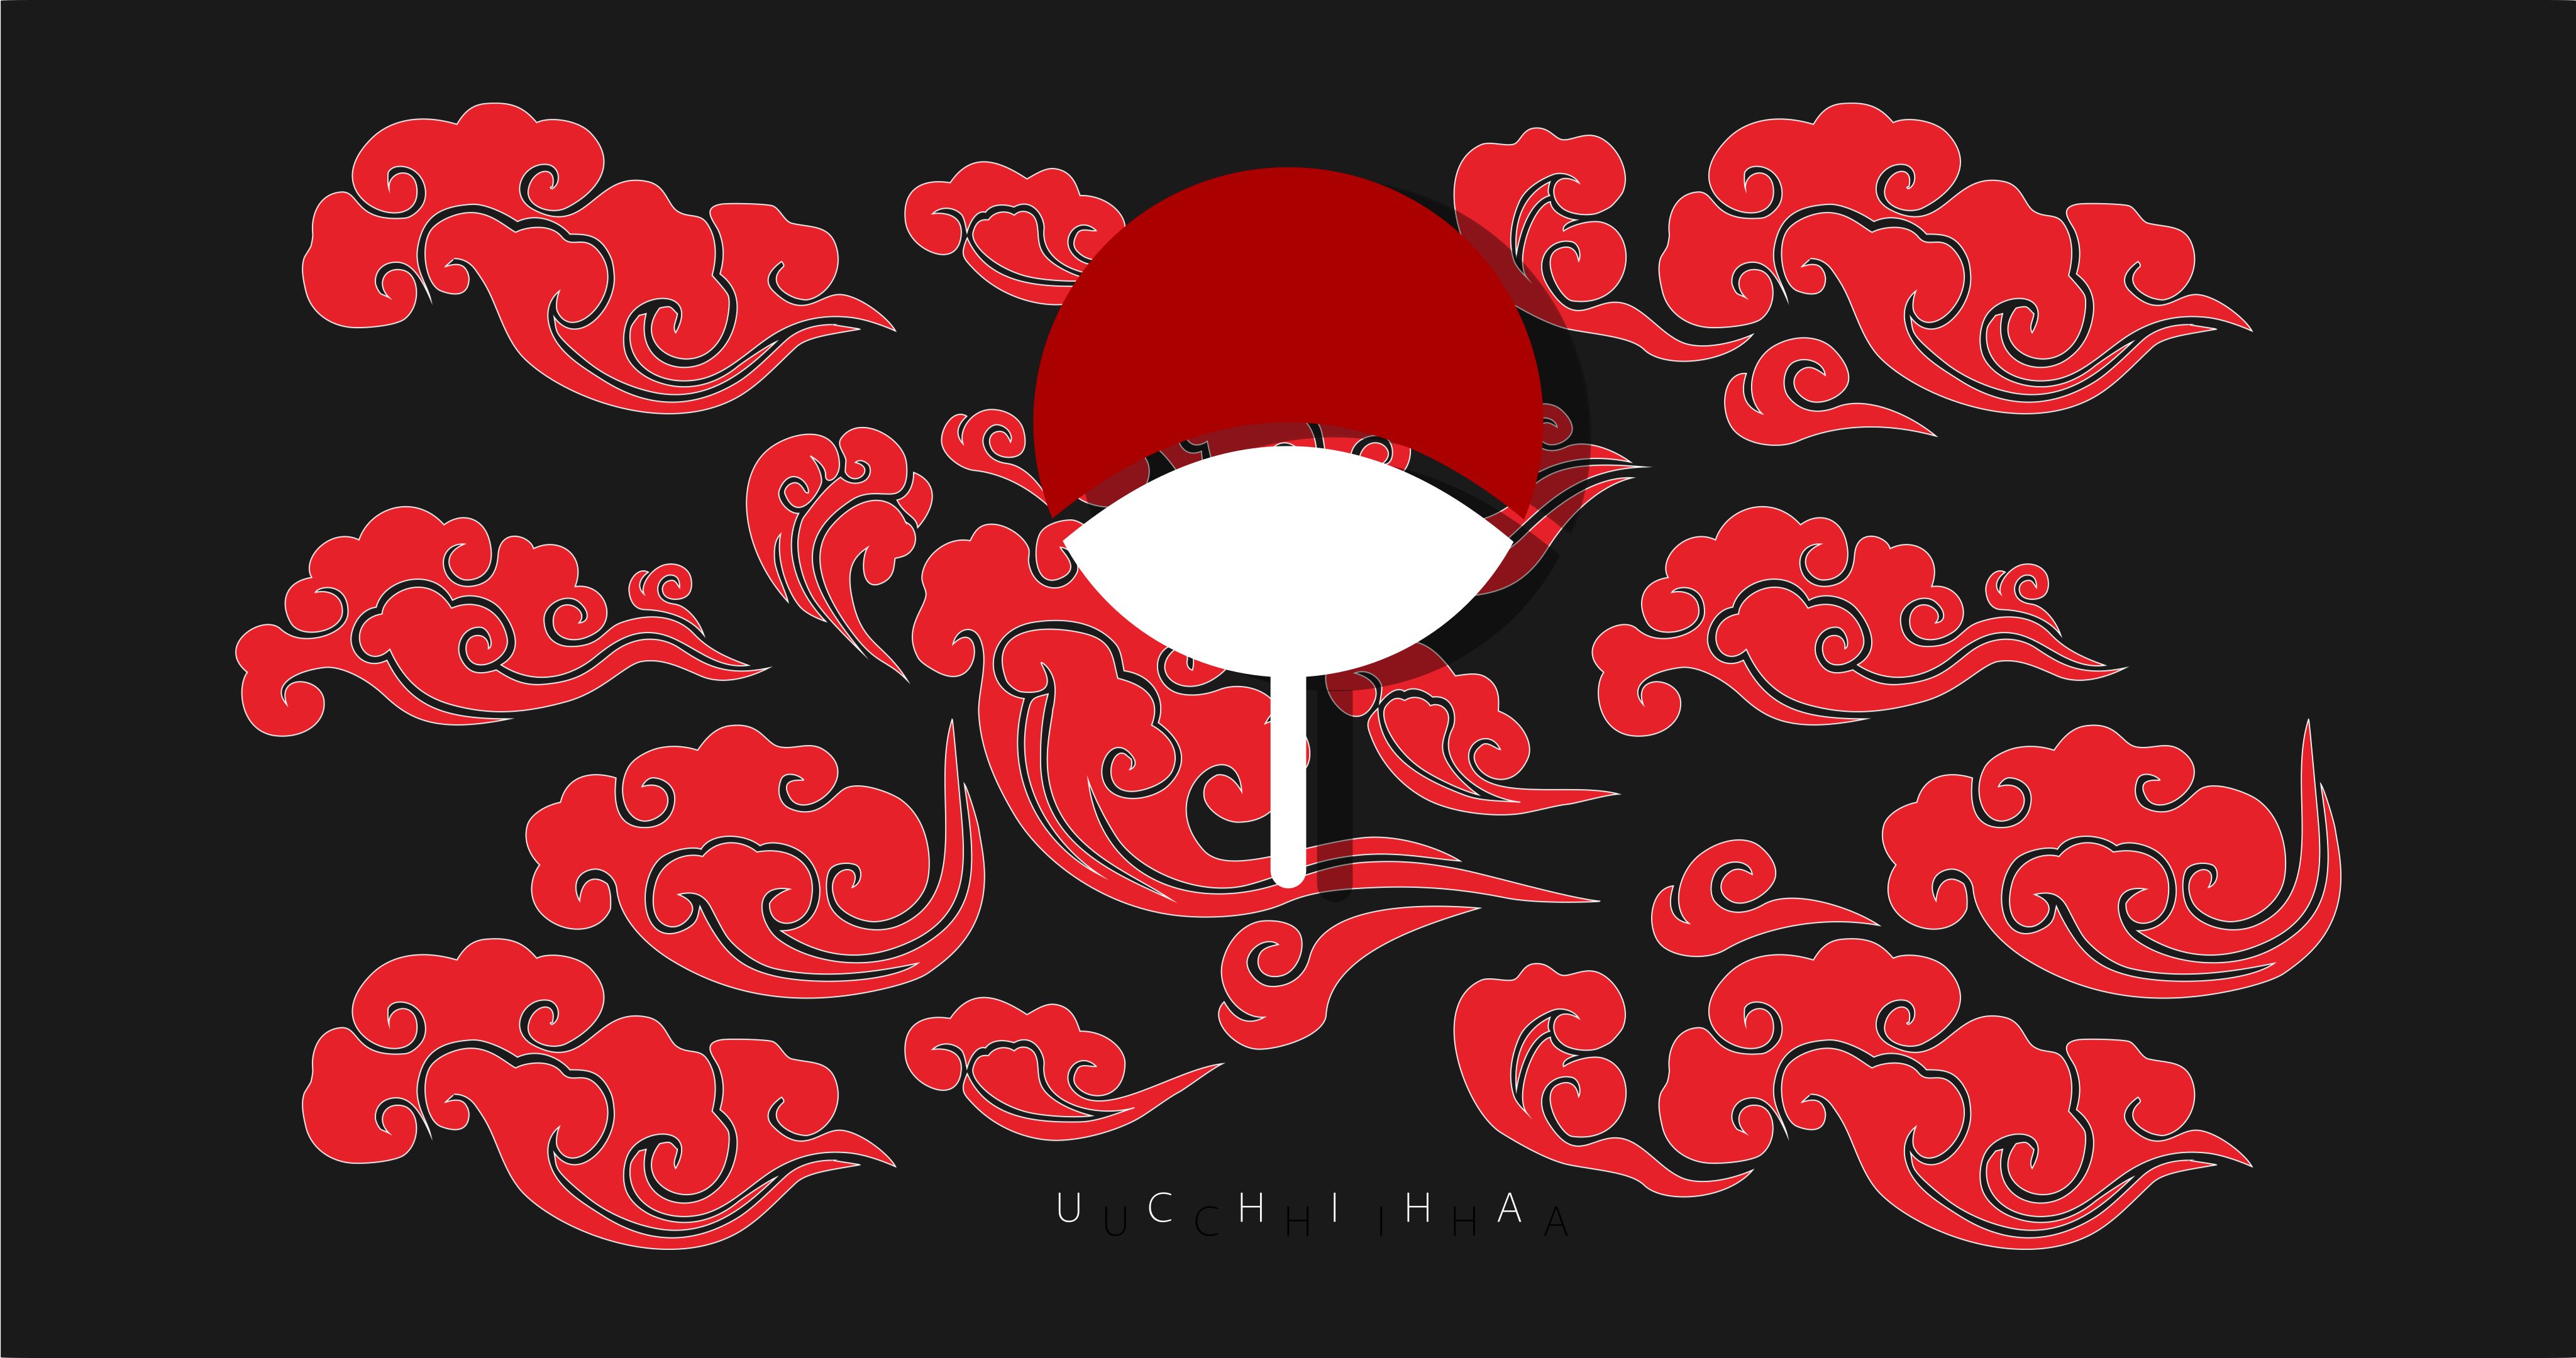 Uchiha Crest and Clouds of blood. [Wallpaper]